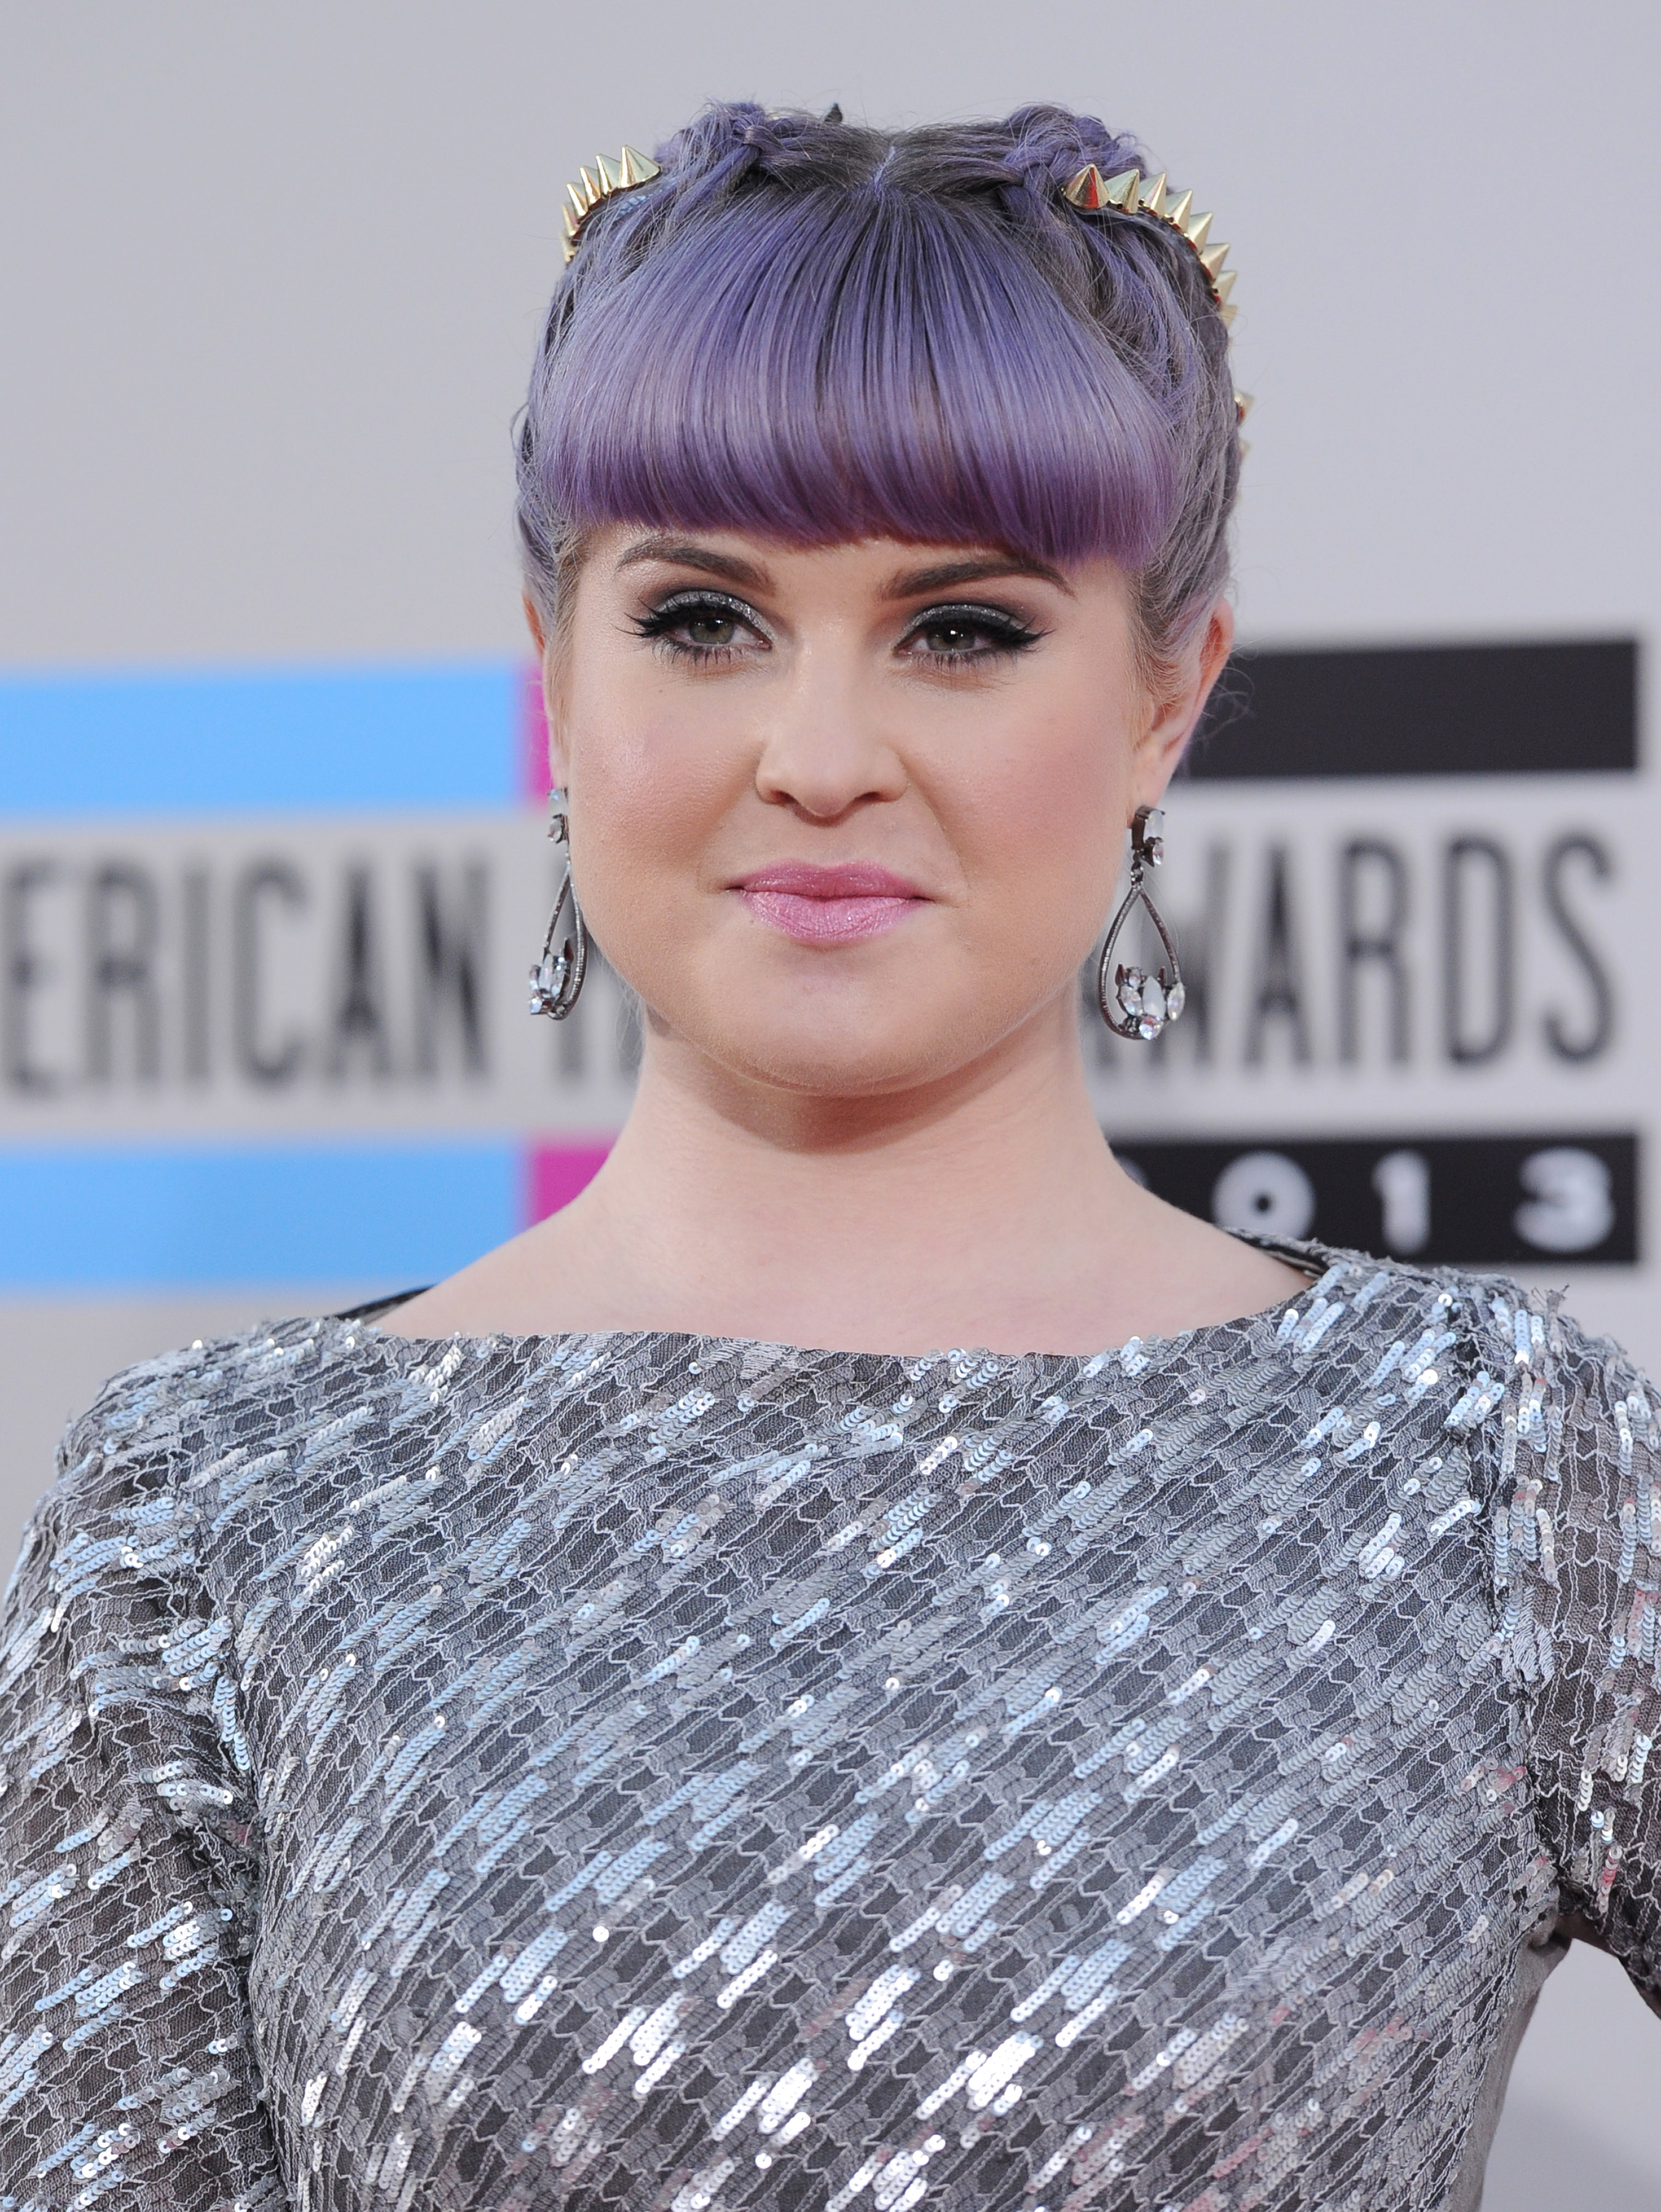 Kelly Osbourne making her entrance at Nokia Theatre L.A. Live during the 2013 American Music Awards on November 24, 2013, in Los Angeles, California | Source: Getty Images